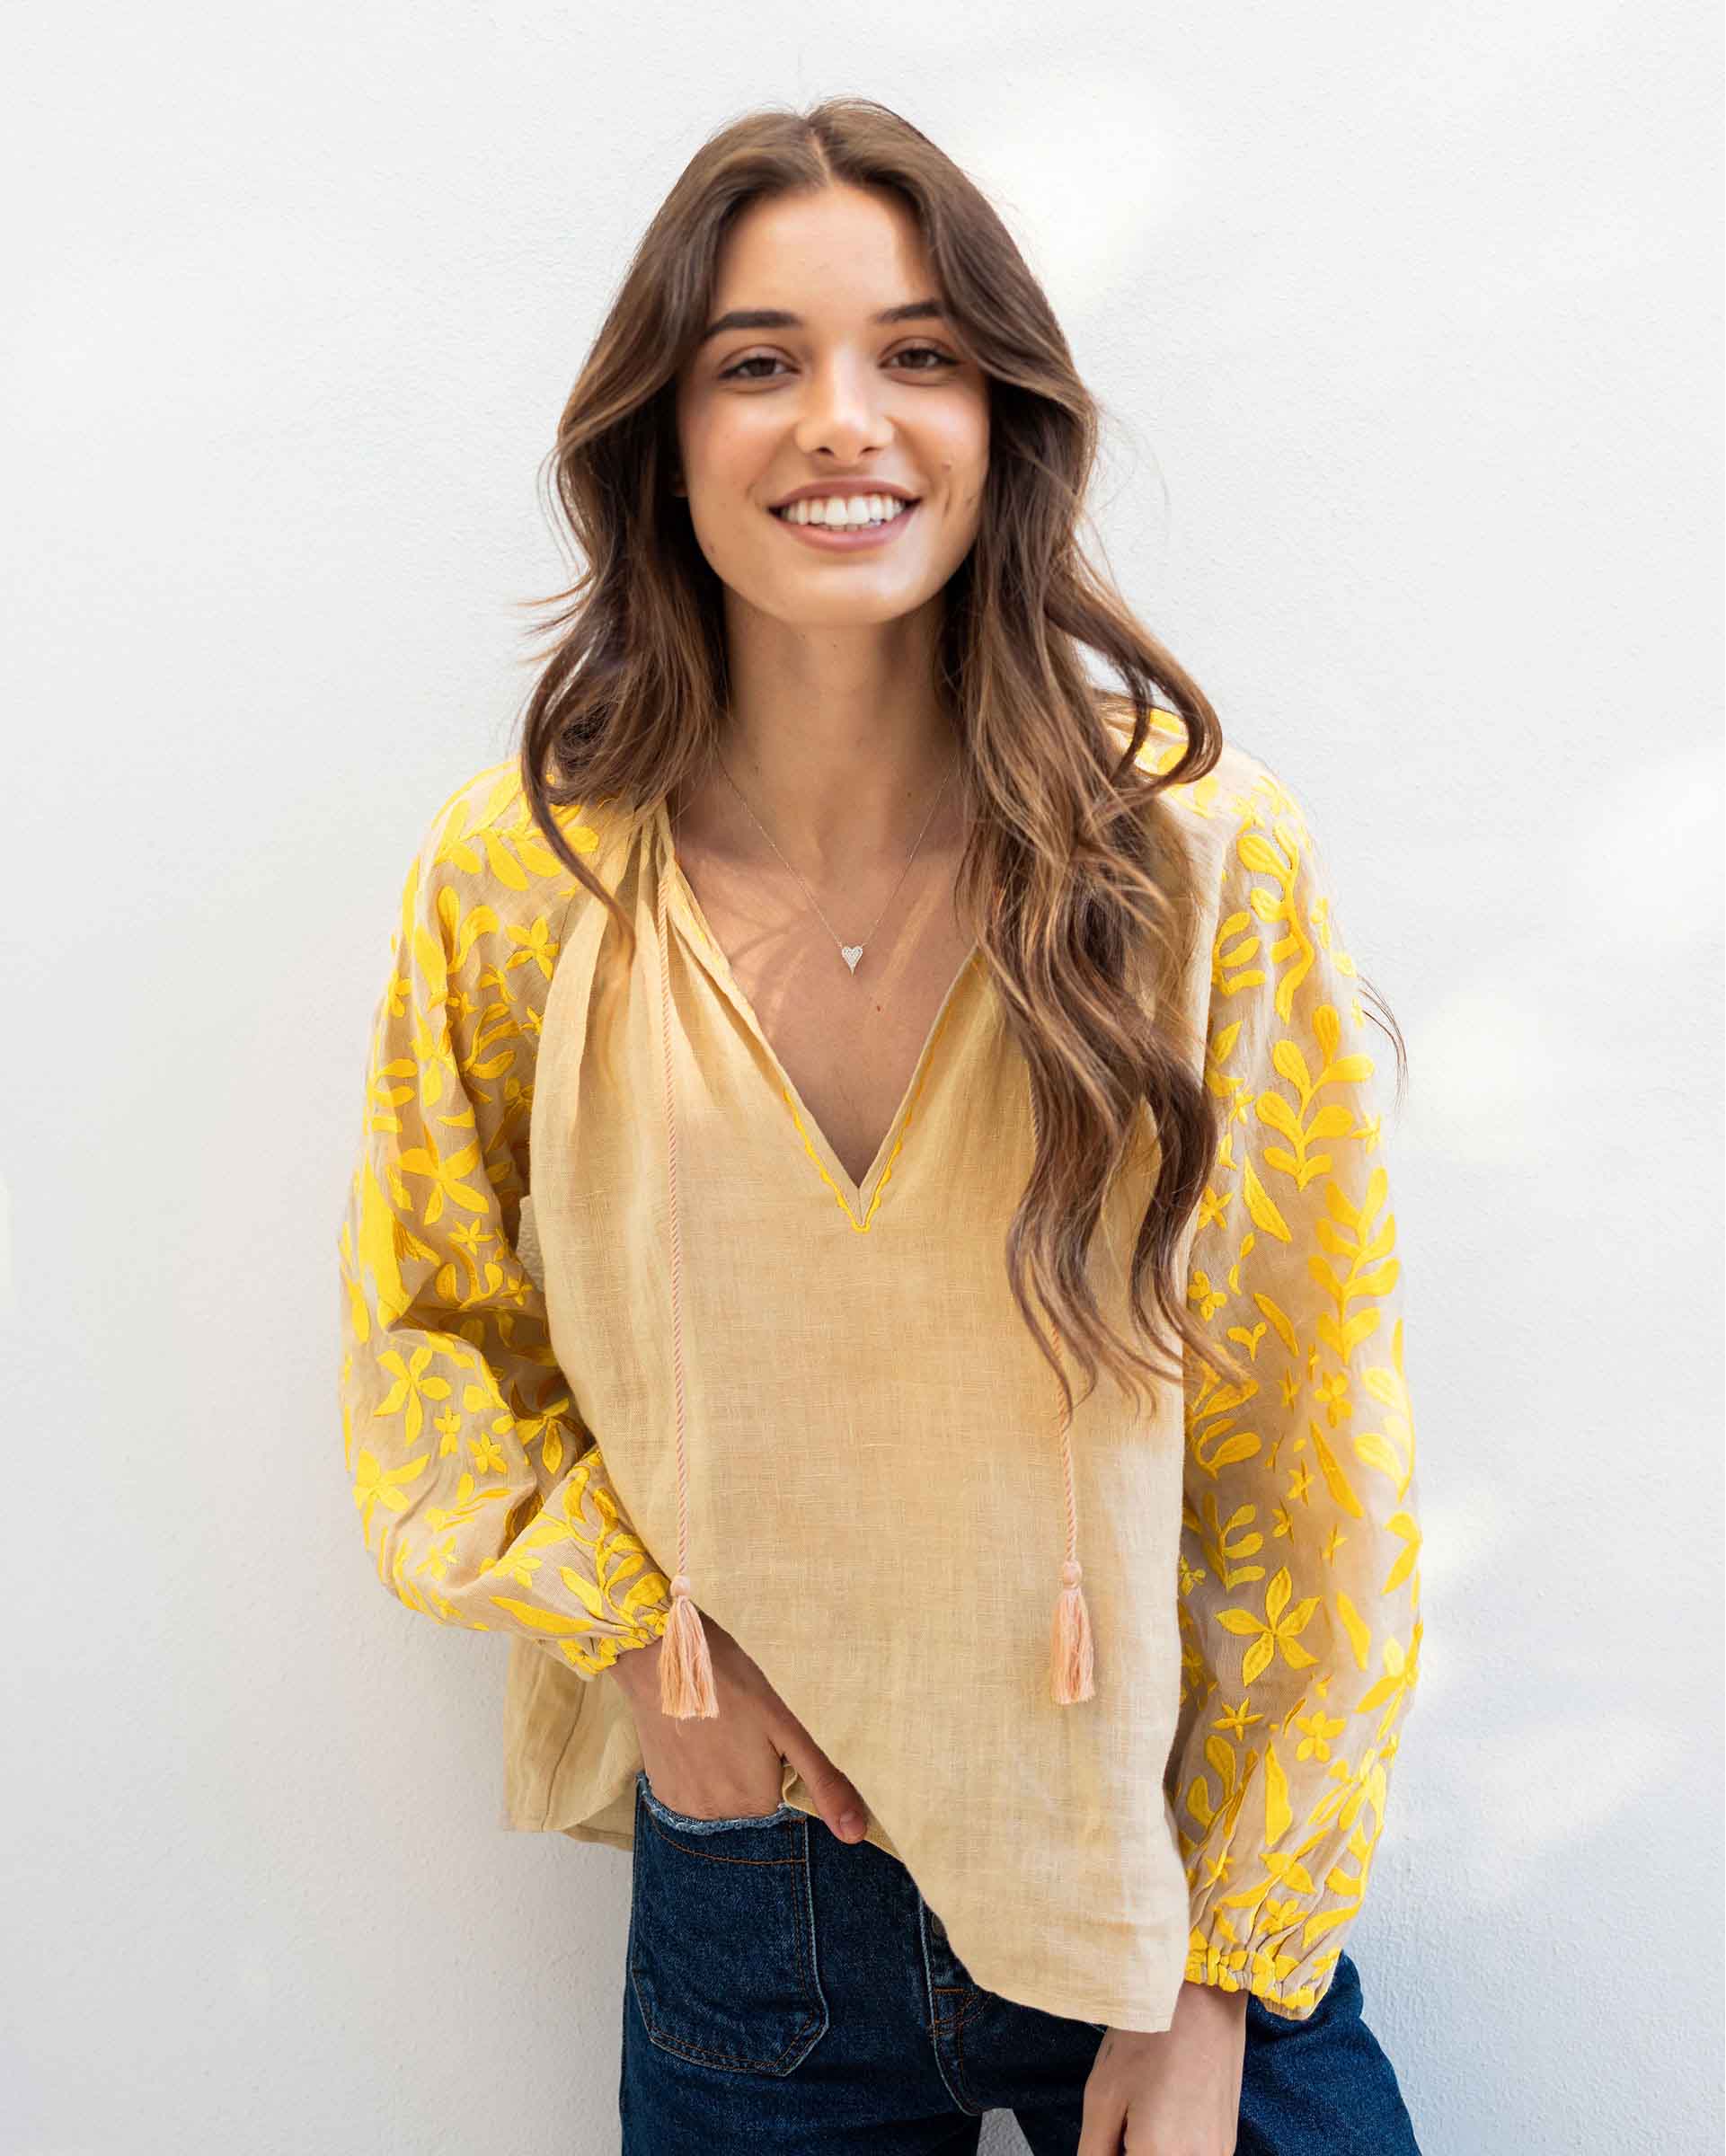 Female wearing a beige and yellow blouse in front of white background